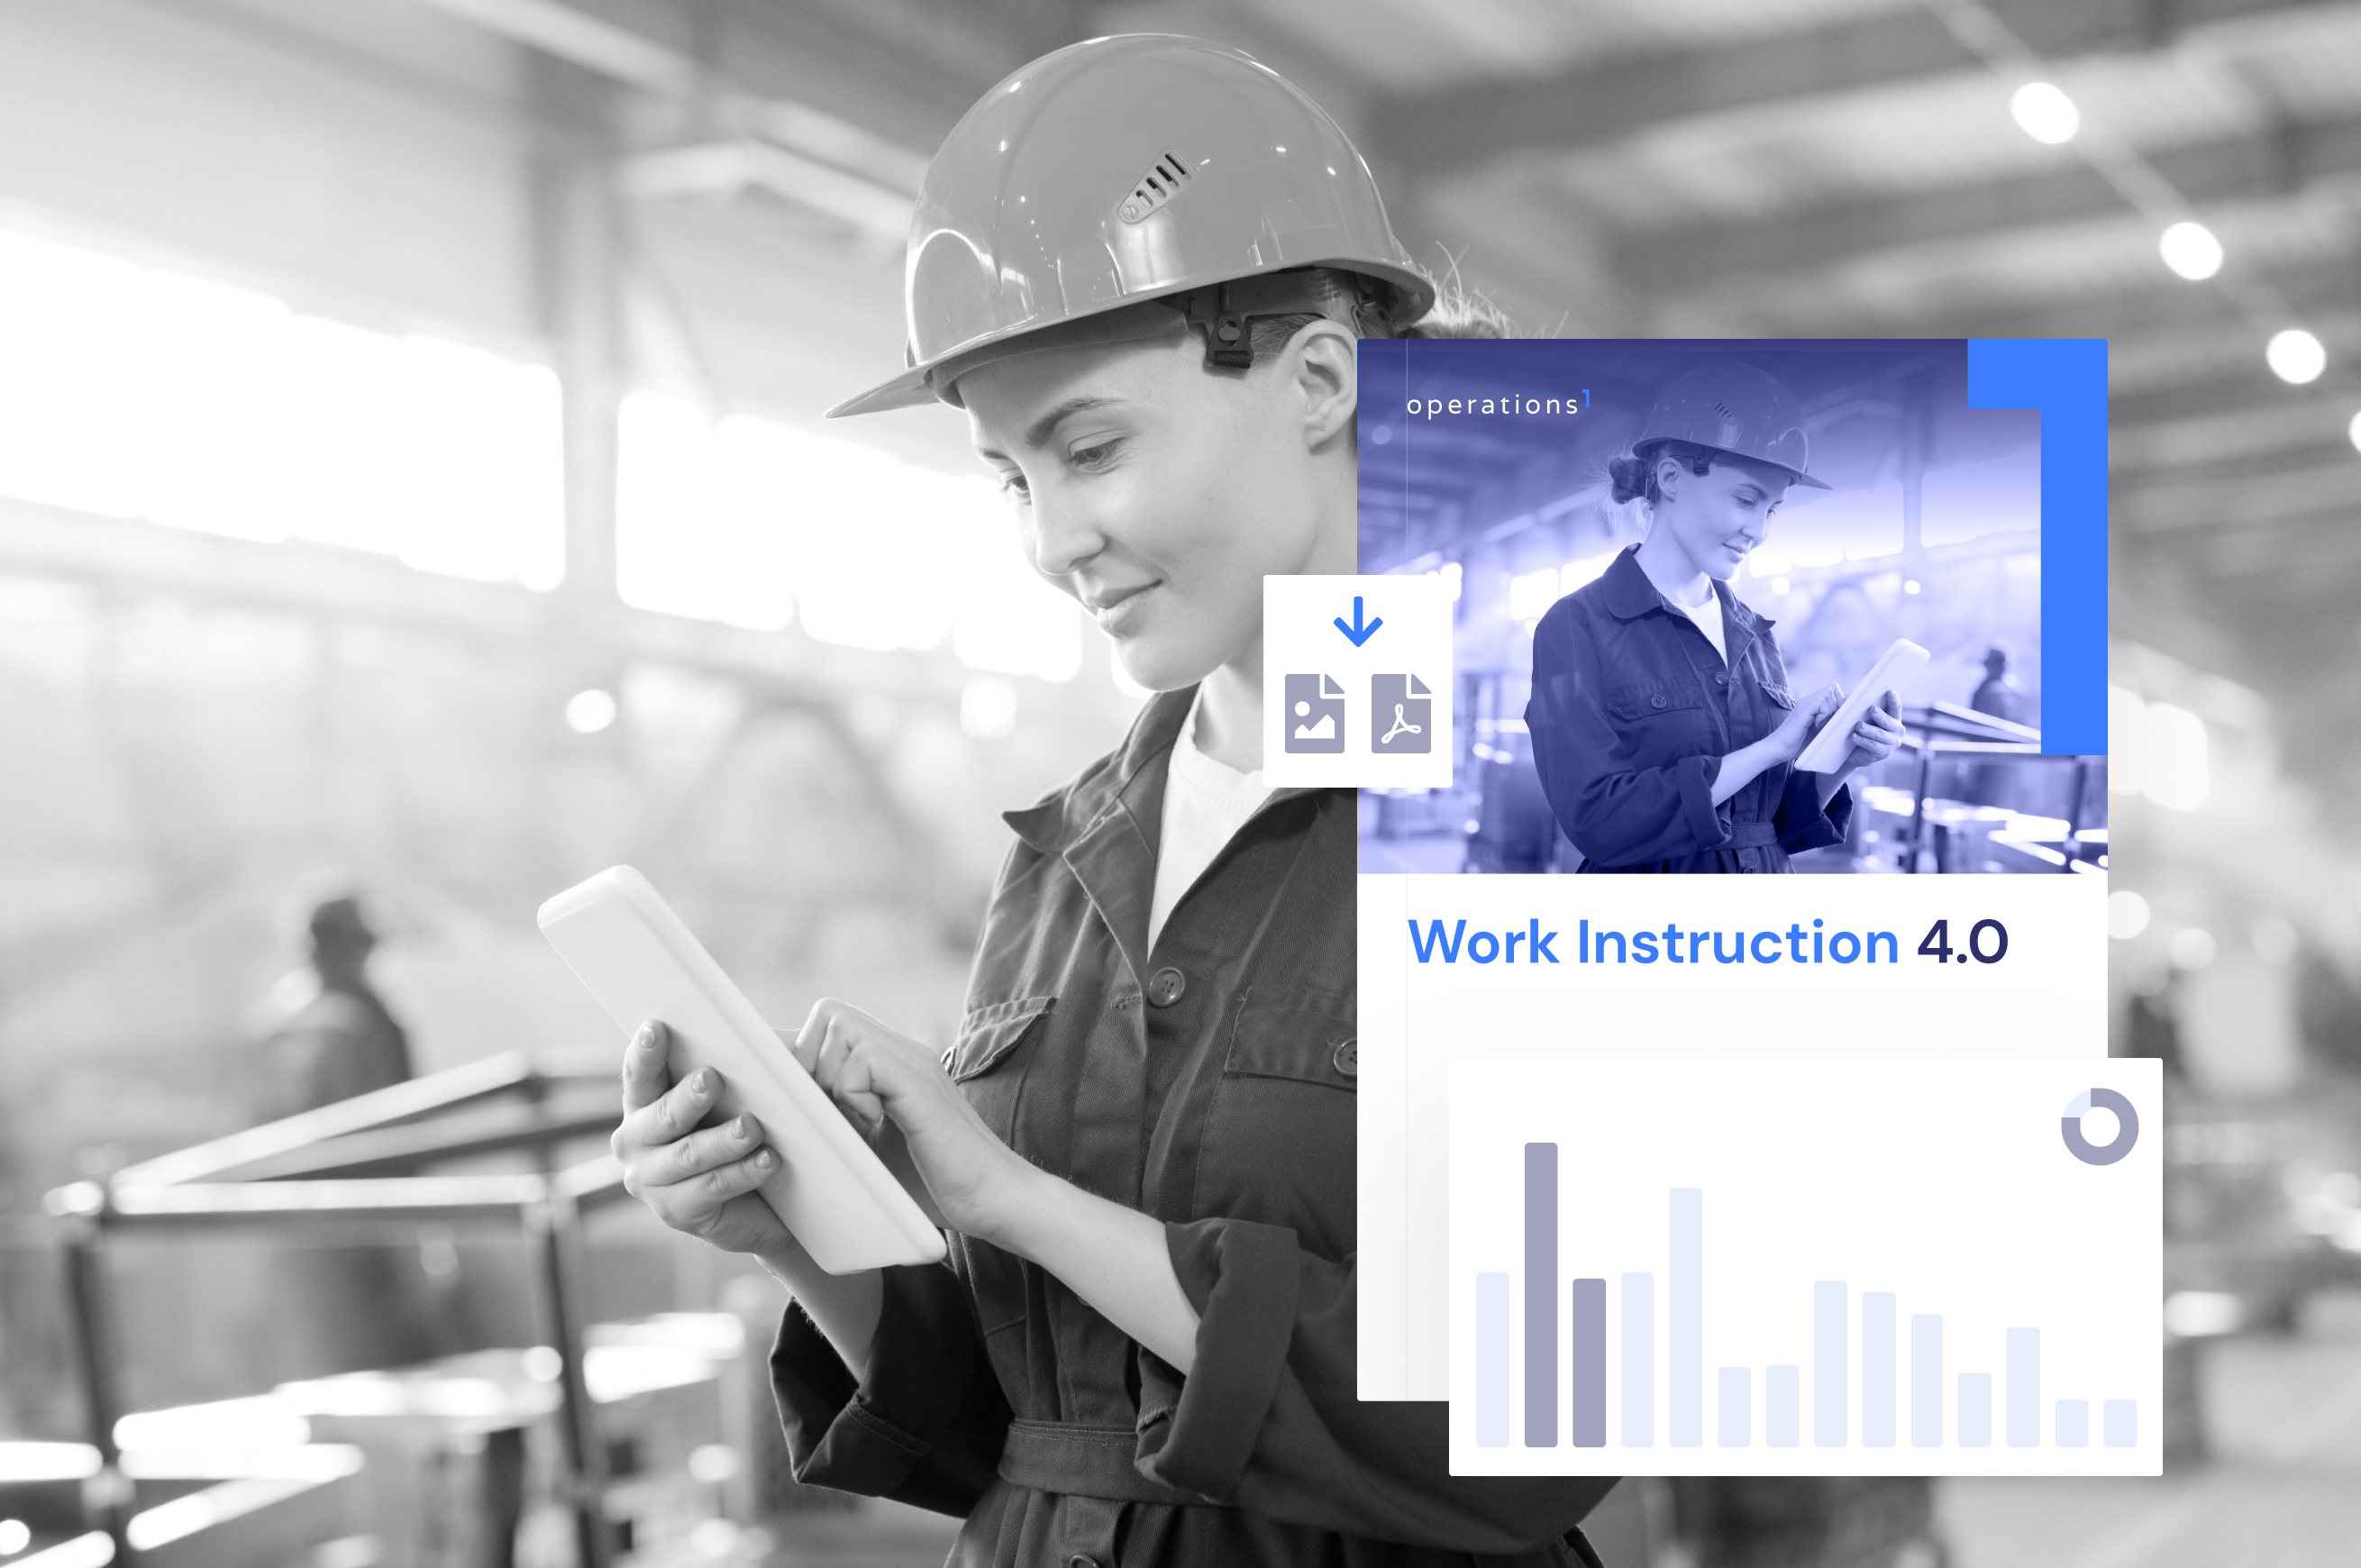 Download Work Instruction 4.0 e-paper